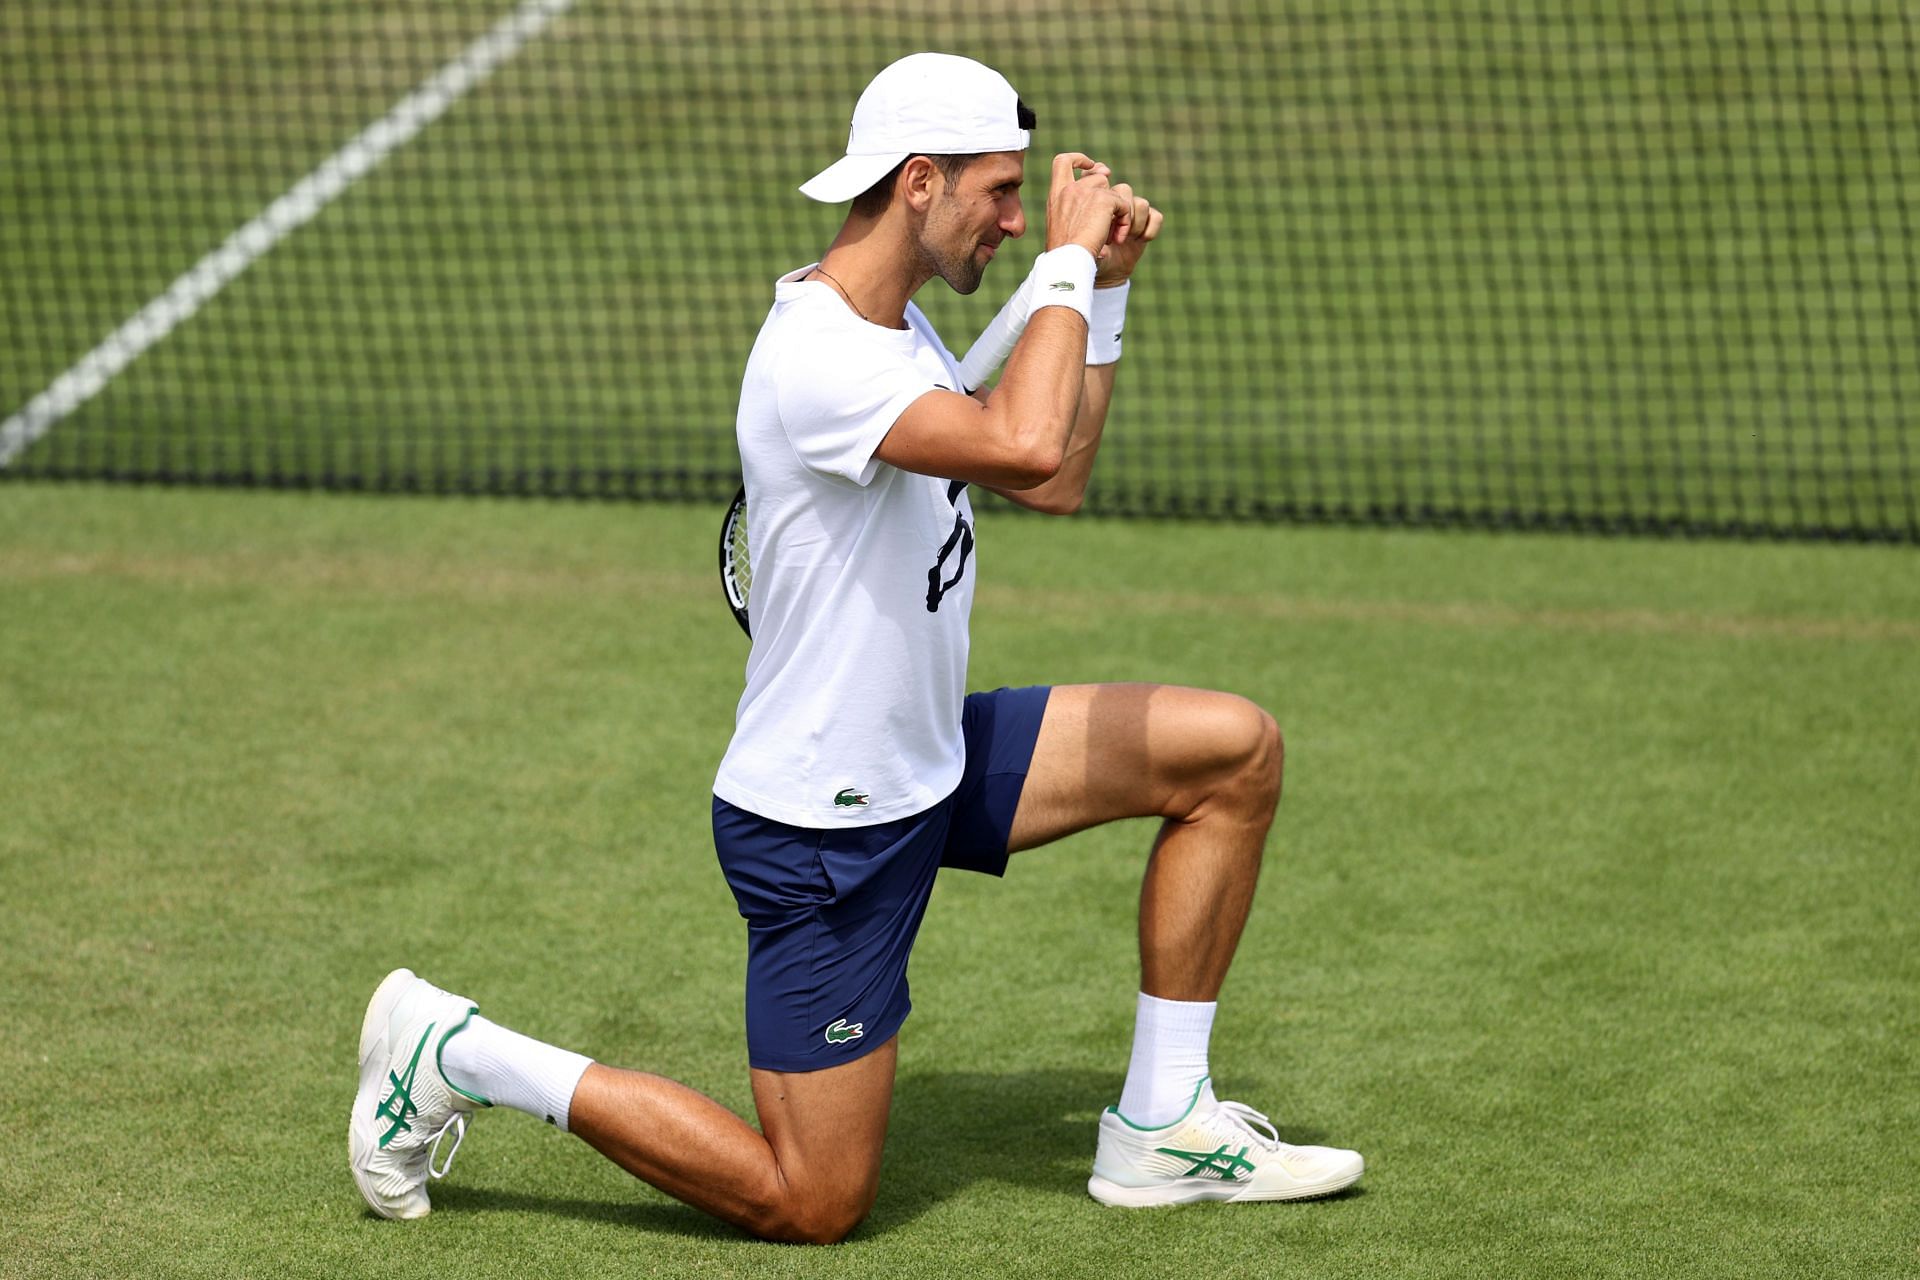 Wimbledon 2022 TV Schedule When are Novak Djokovic and Ons Jabeur playing?